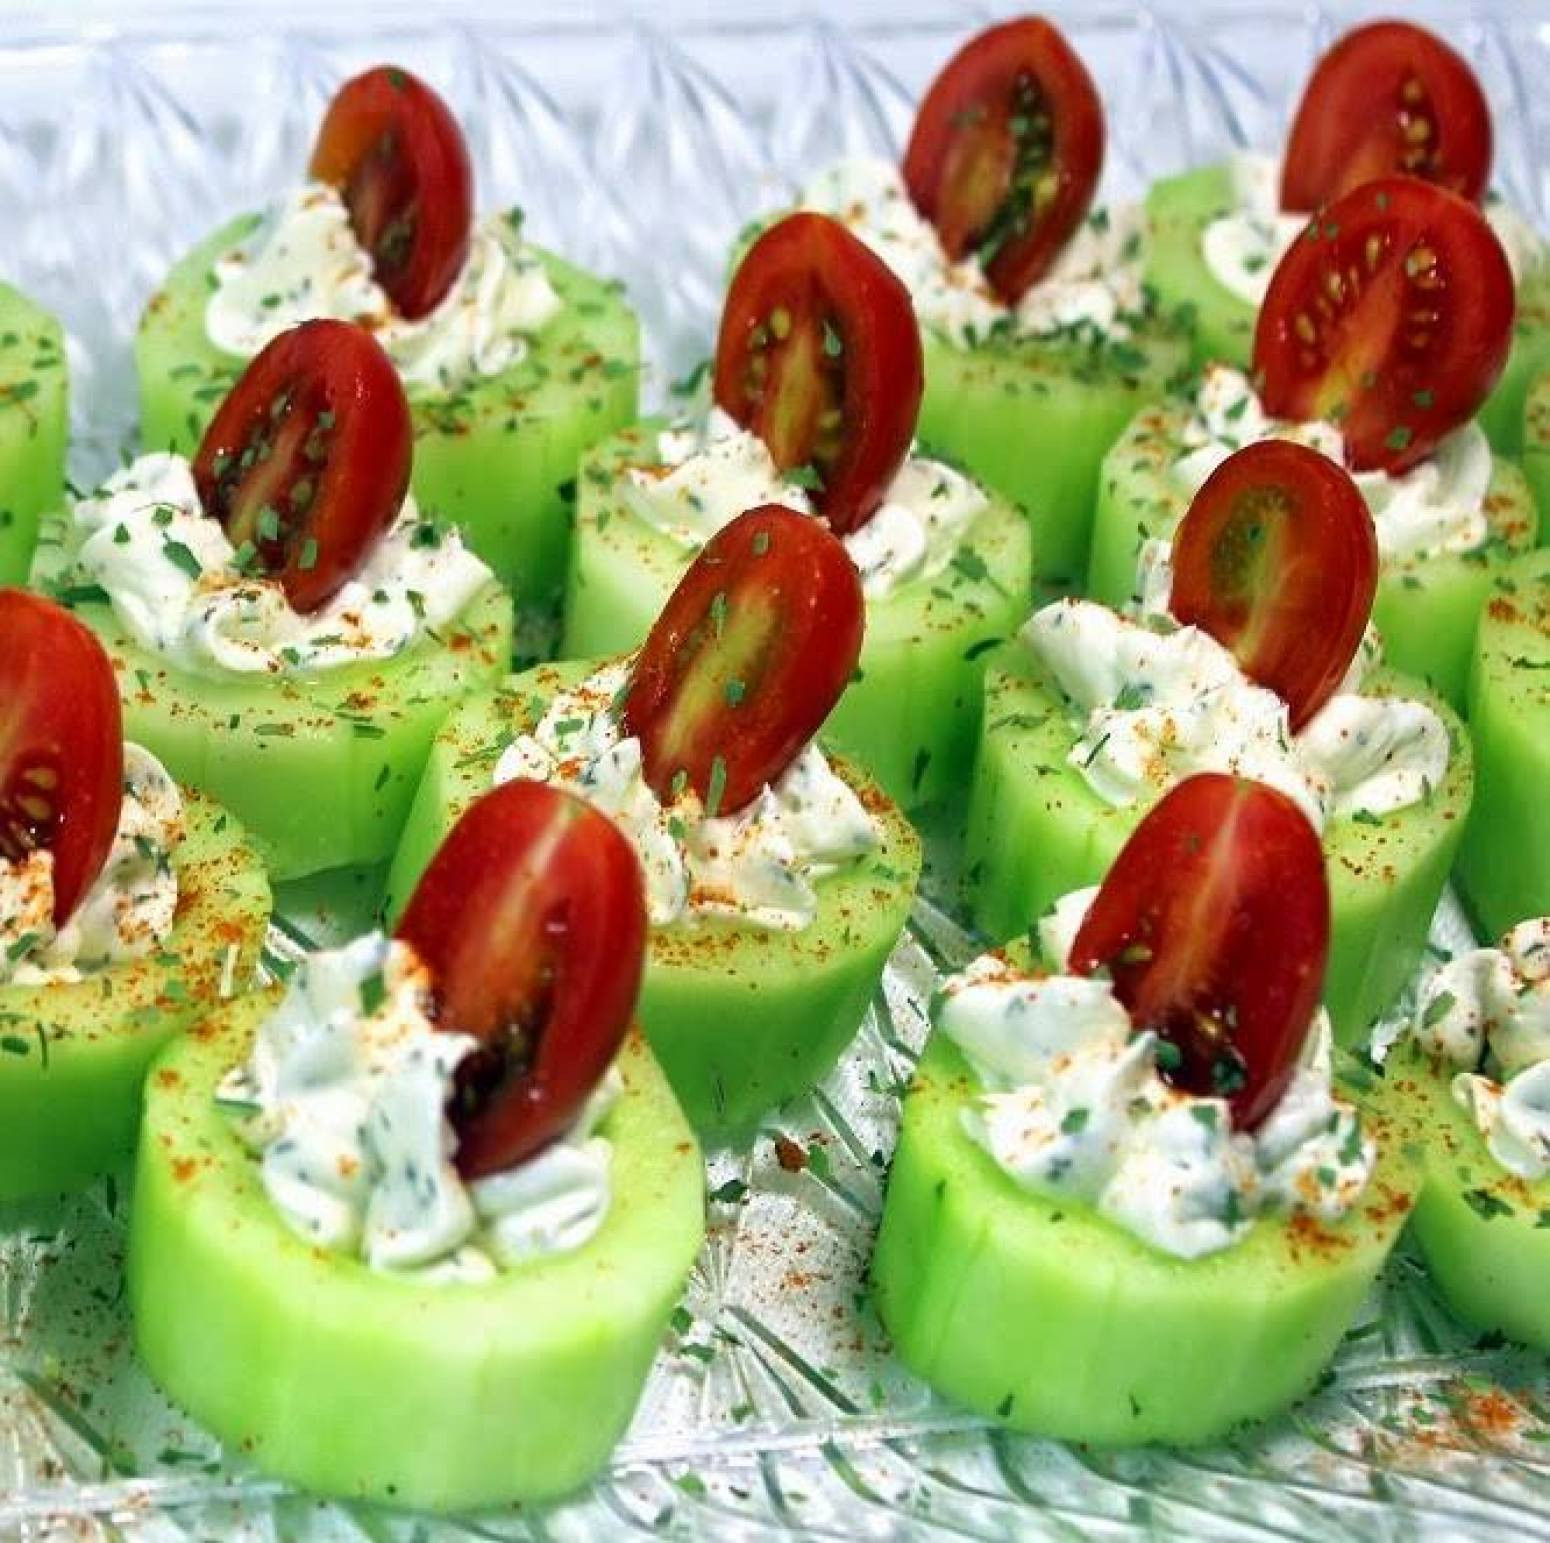 Cucumber Appetizers With Dill And Cream Cheese
 Cucumber Bites with Herb Cream Cheese and Cherry Tomatoes